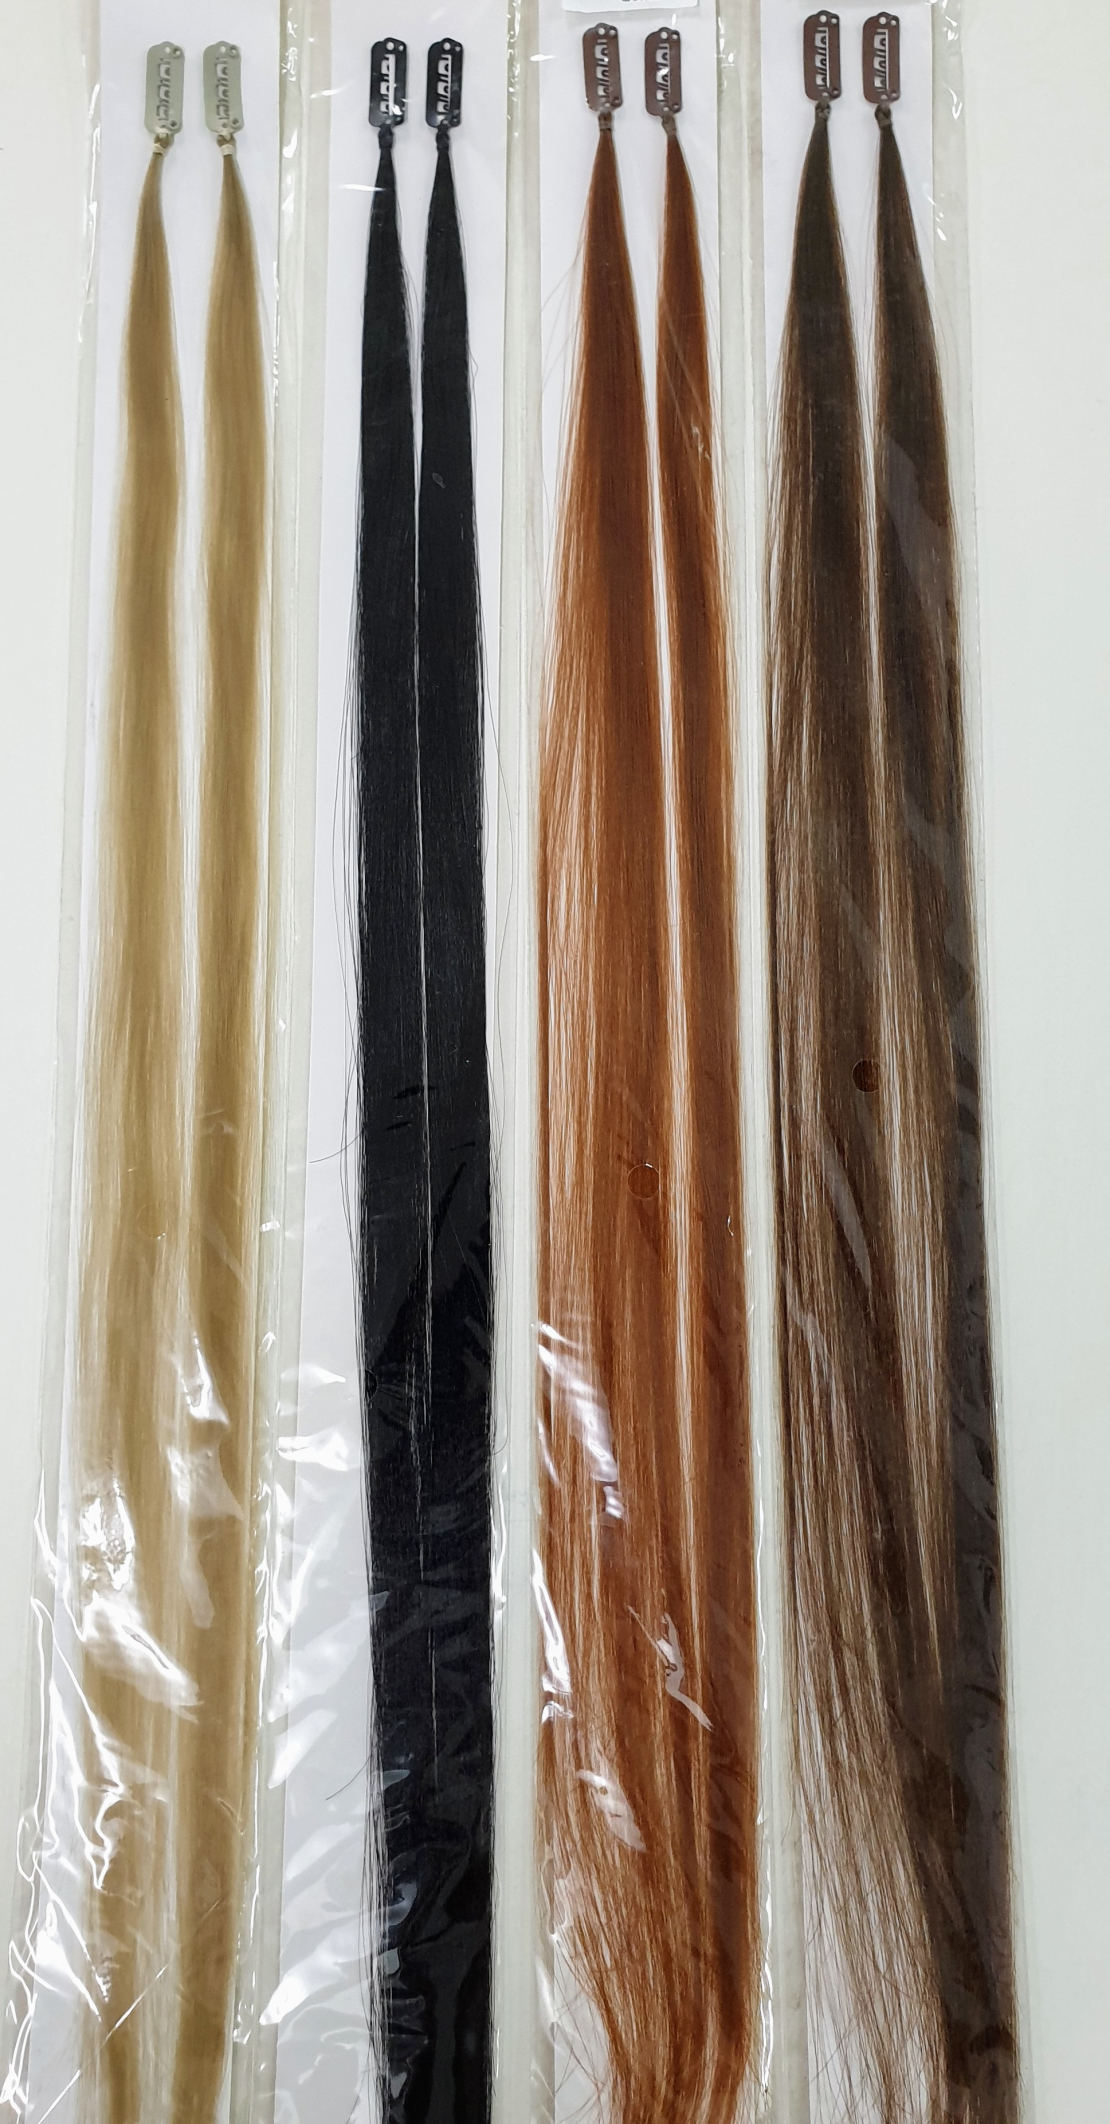 Colorful synthetic hair stripes